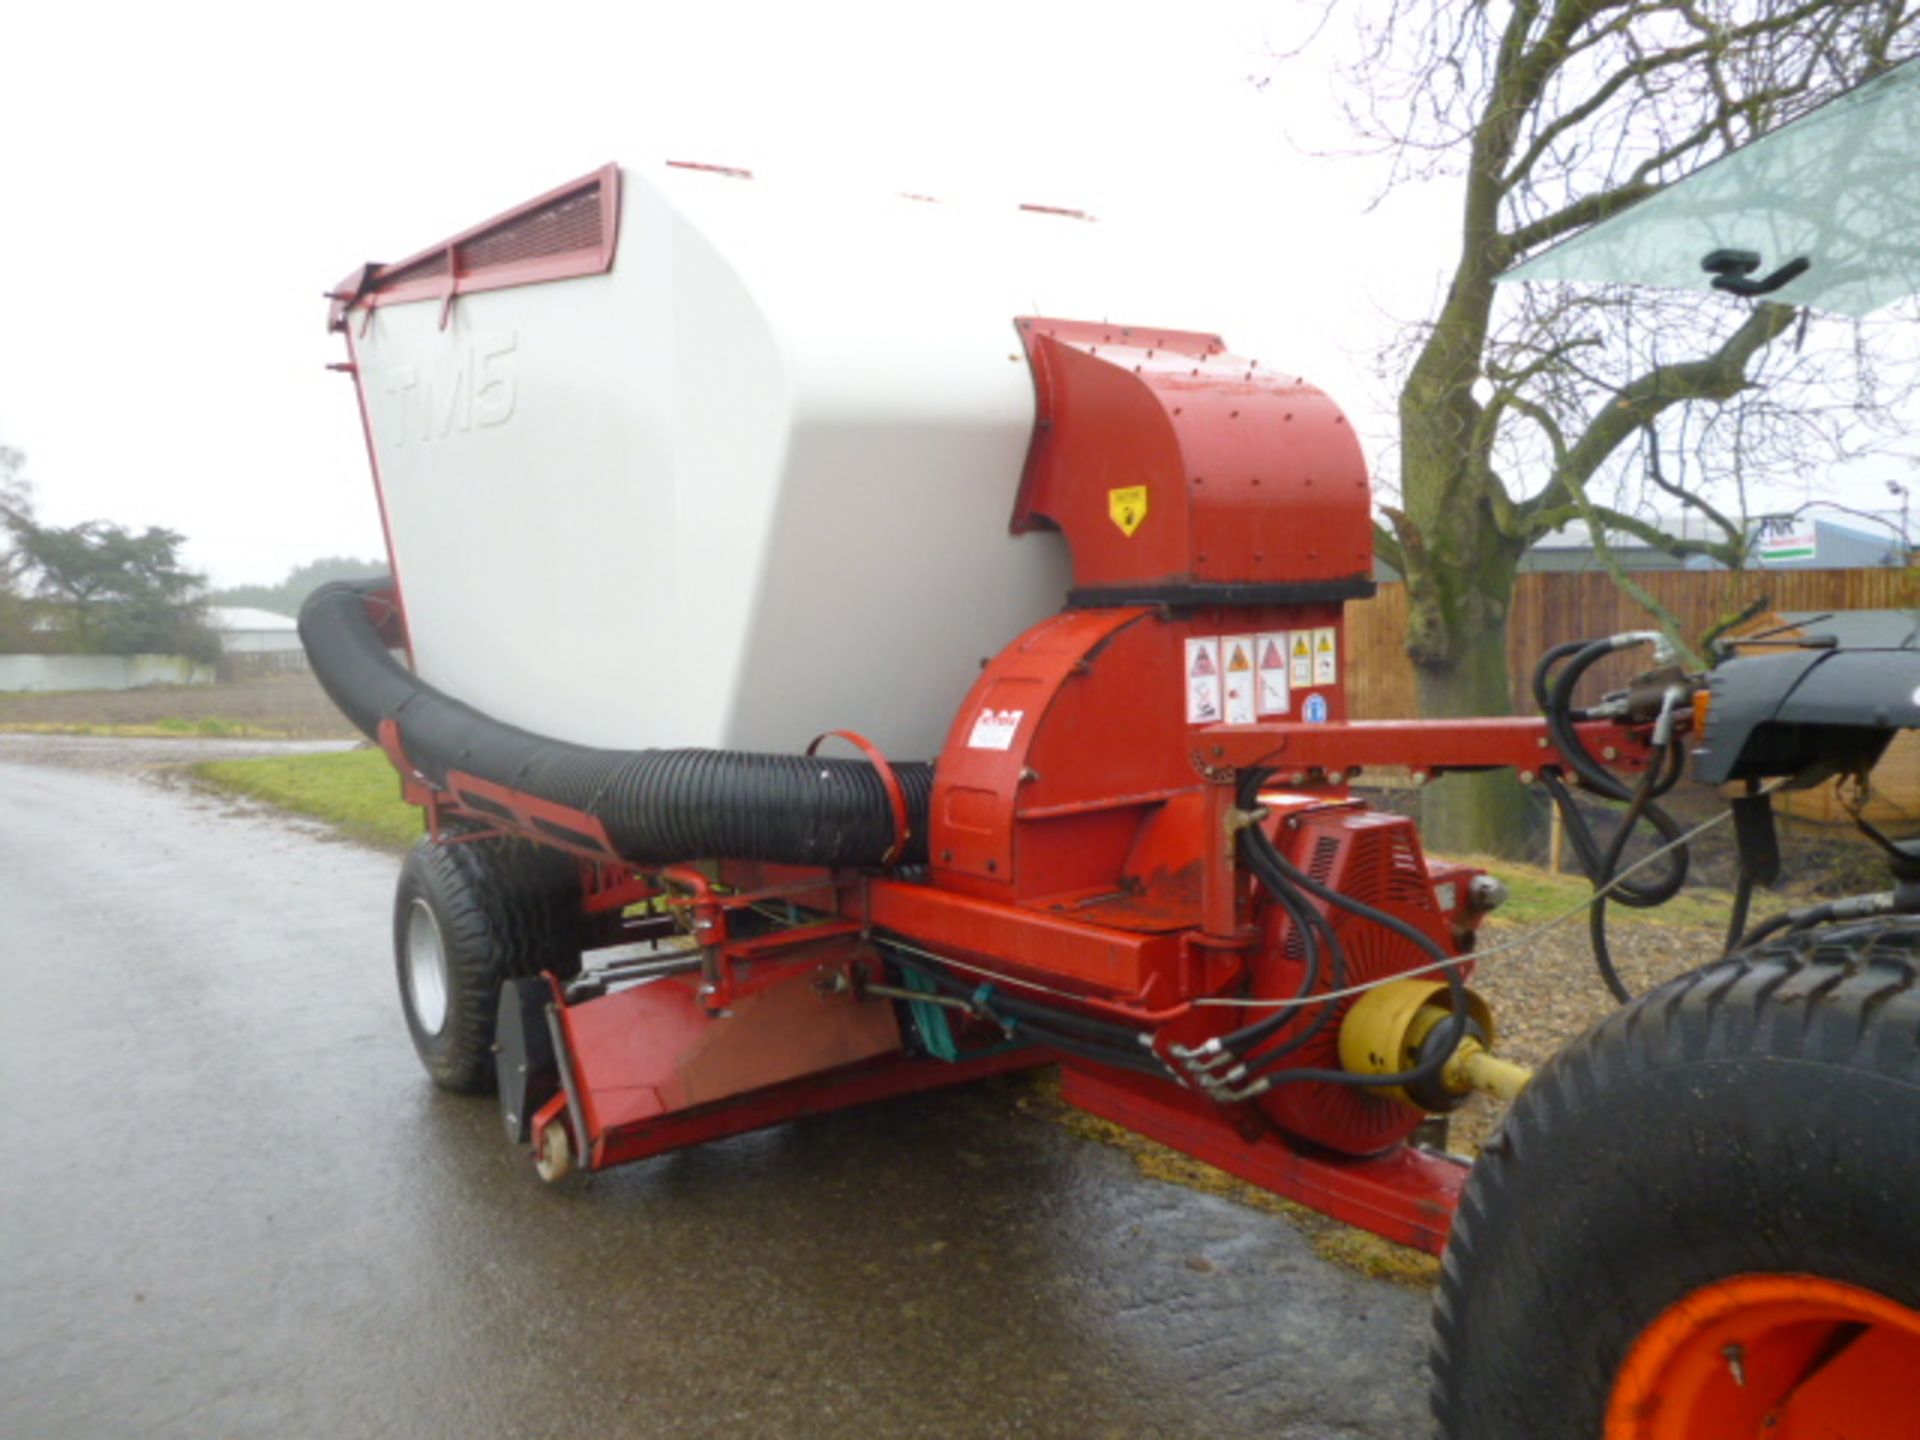 TURFMATCH TM5 VACUUM SWEEPER - YEAR 2008 TRACTOR TRAILED SWEEPER VACUUM. - Image 2 of 4